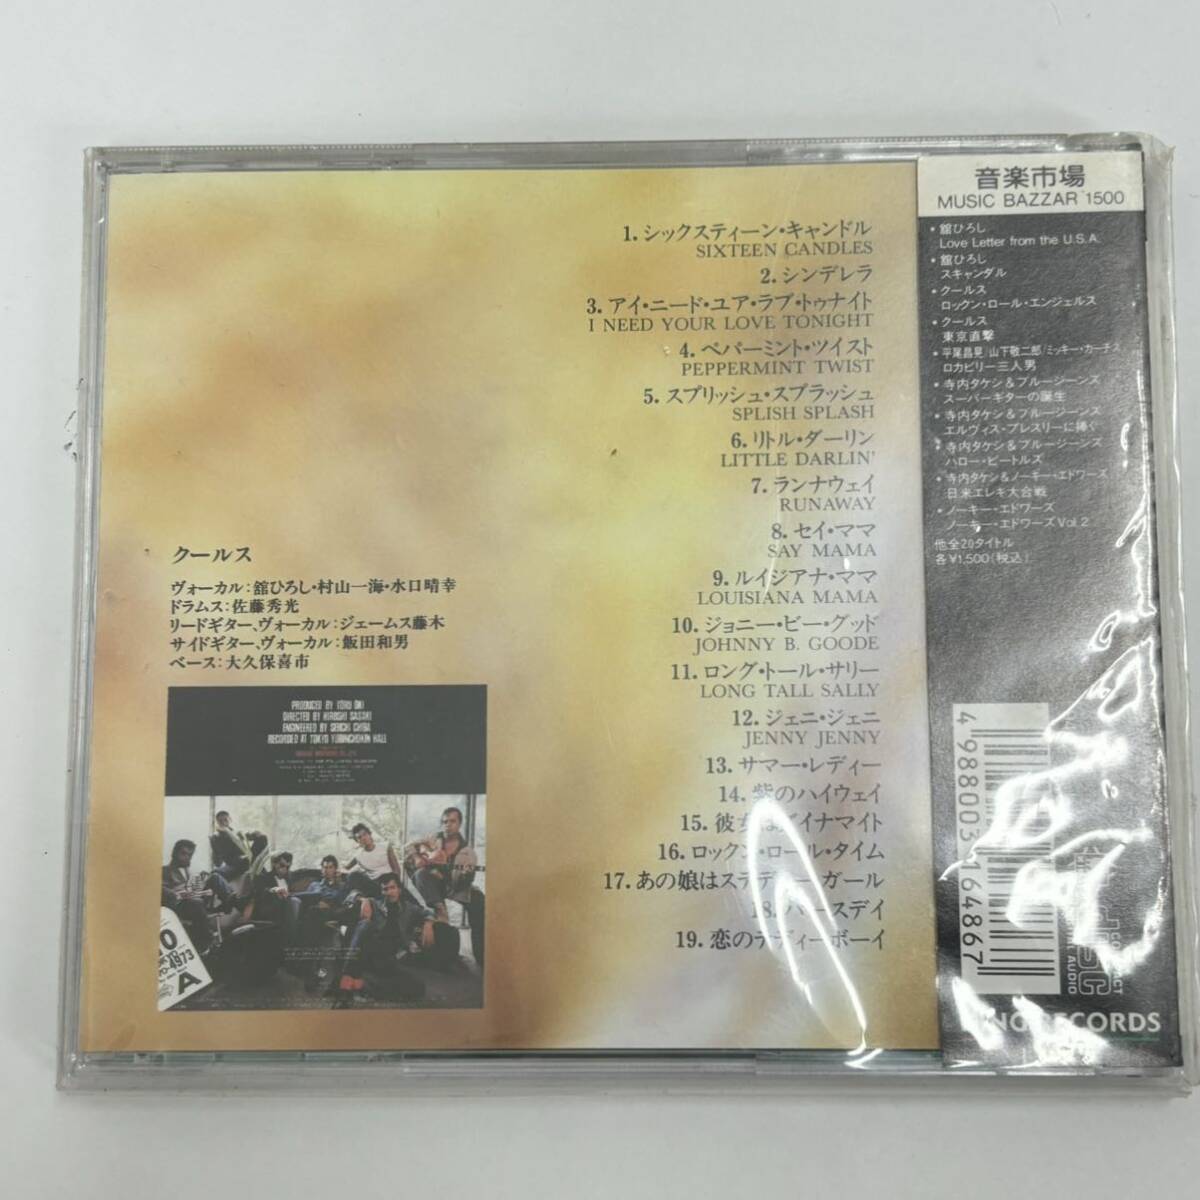 [ collector worth seeing!]* cool s Tokyo direct .CD* cool s* Live | music market |COOLS LIVE|KICS 8054|....|Q record | with belt |DC0